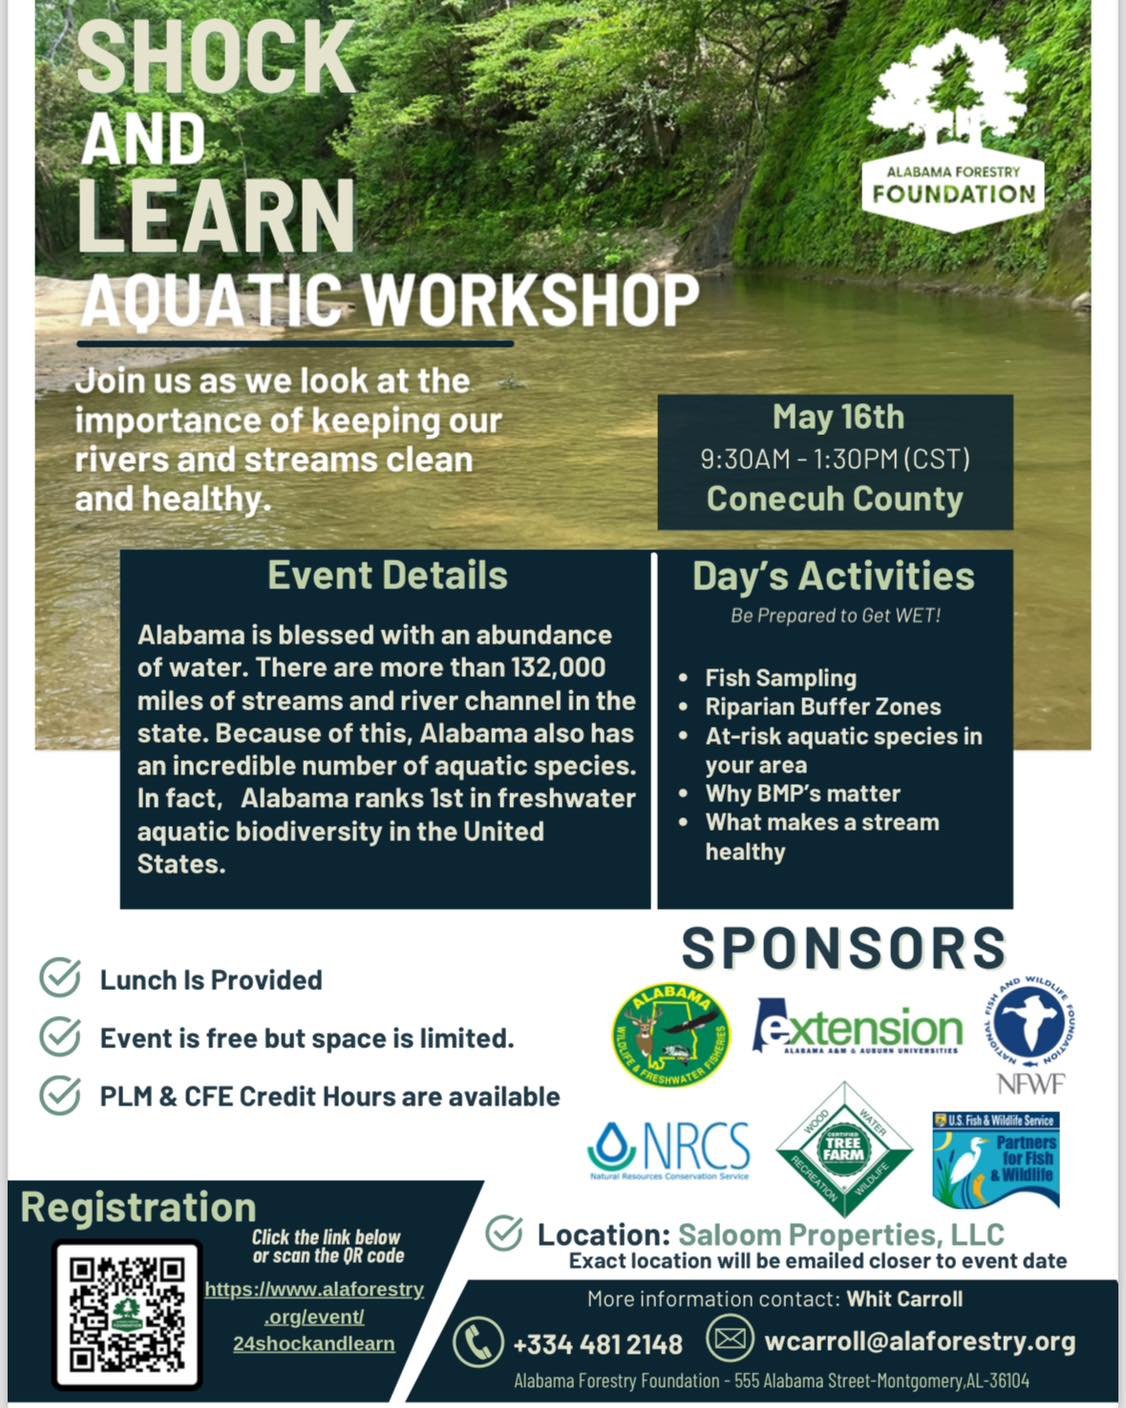 There is still time to register! Come out and join us to see how many species are living in Alabama's rivers and streams.